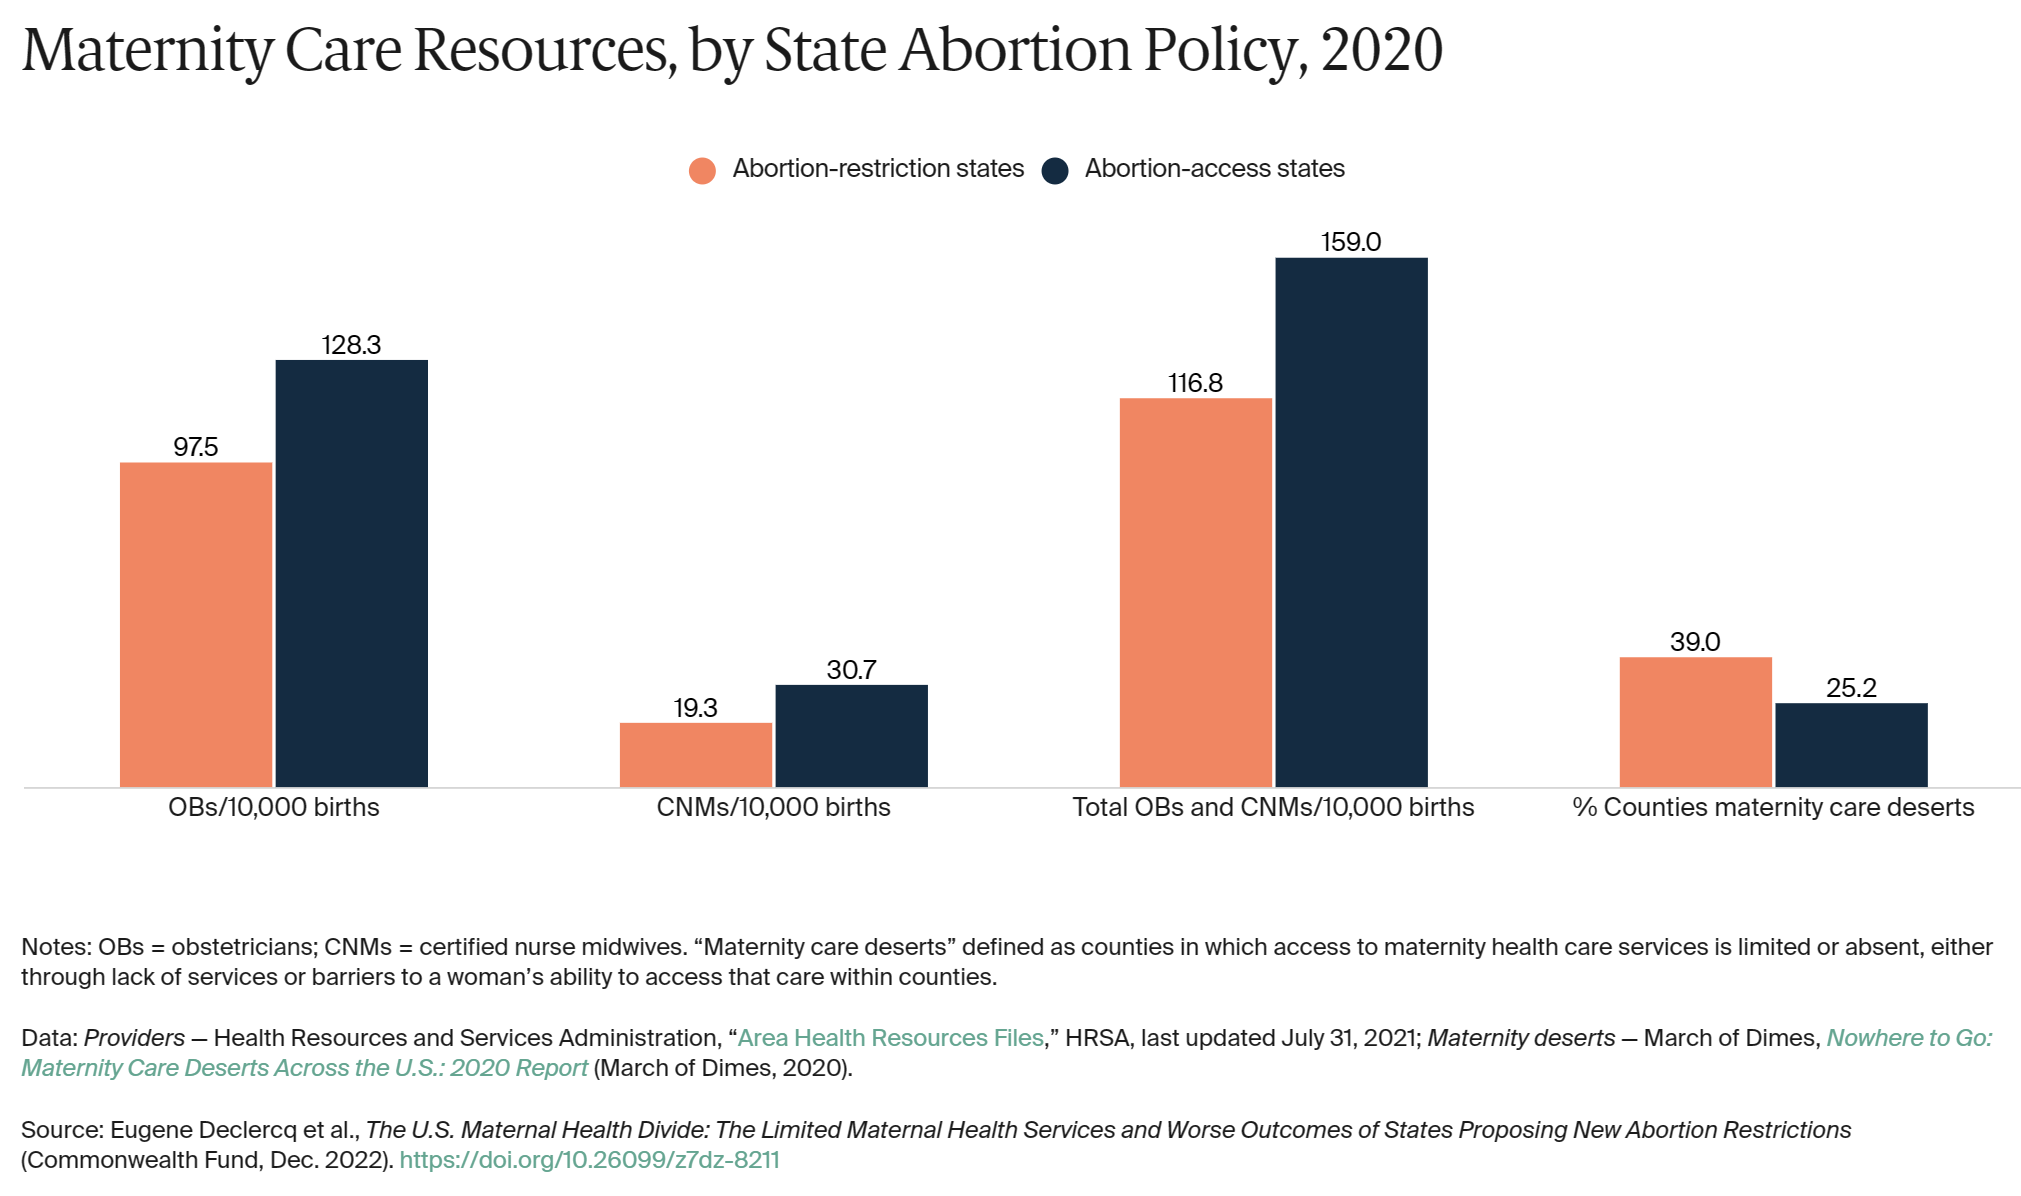 Maternity Care Resources, by State Abortion Policy, 2020. 39 percent of counties in abortion-restriction states can be considered maternity care deserts, compared with 25 percent of counties in abortion-access states. Graphic: Commonwealth Fund